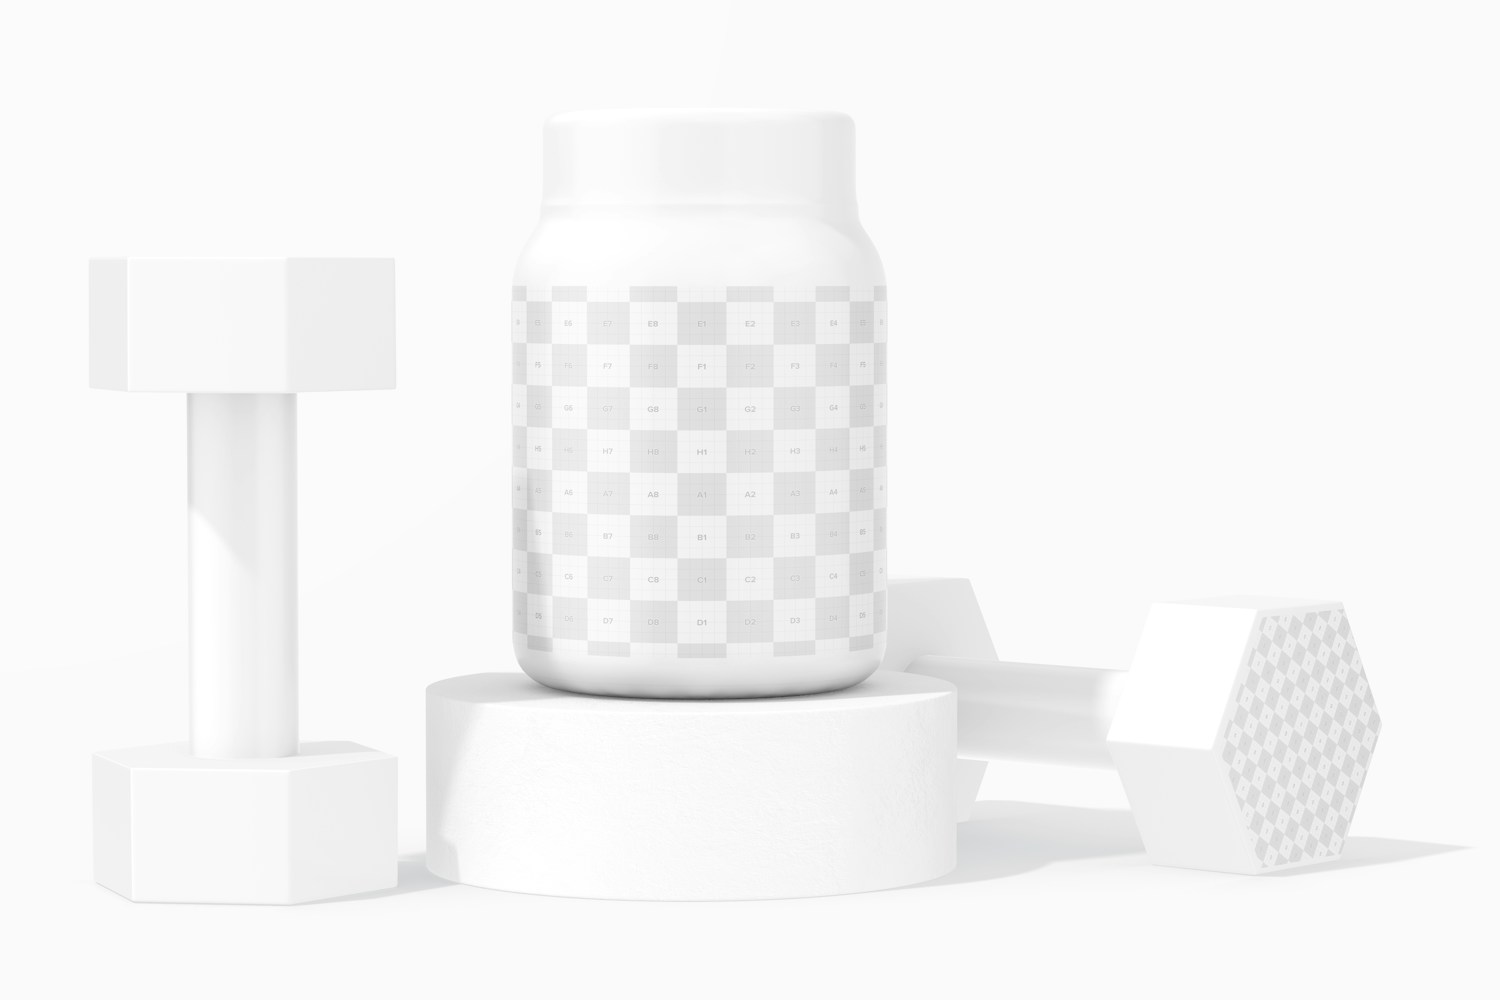 20 gr Protein Powder Container Mockup, with Dumbbells